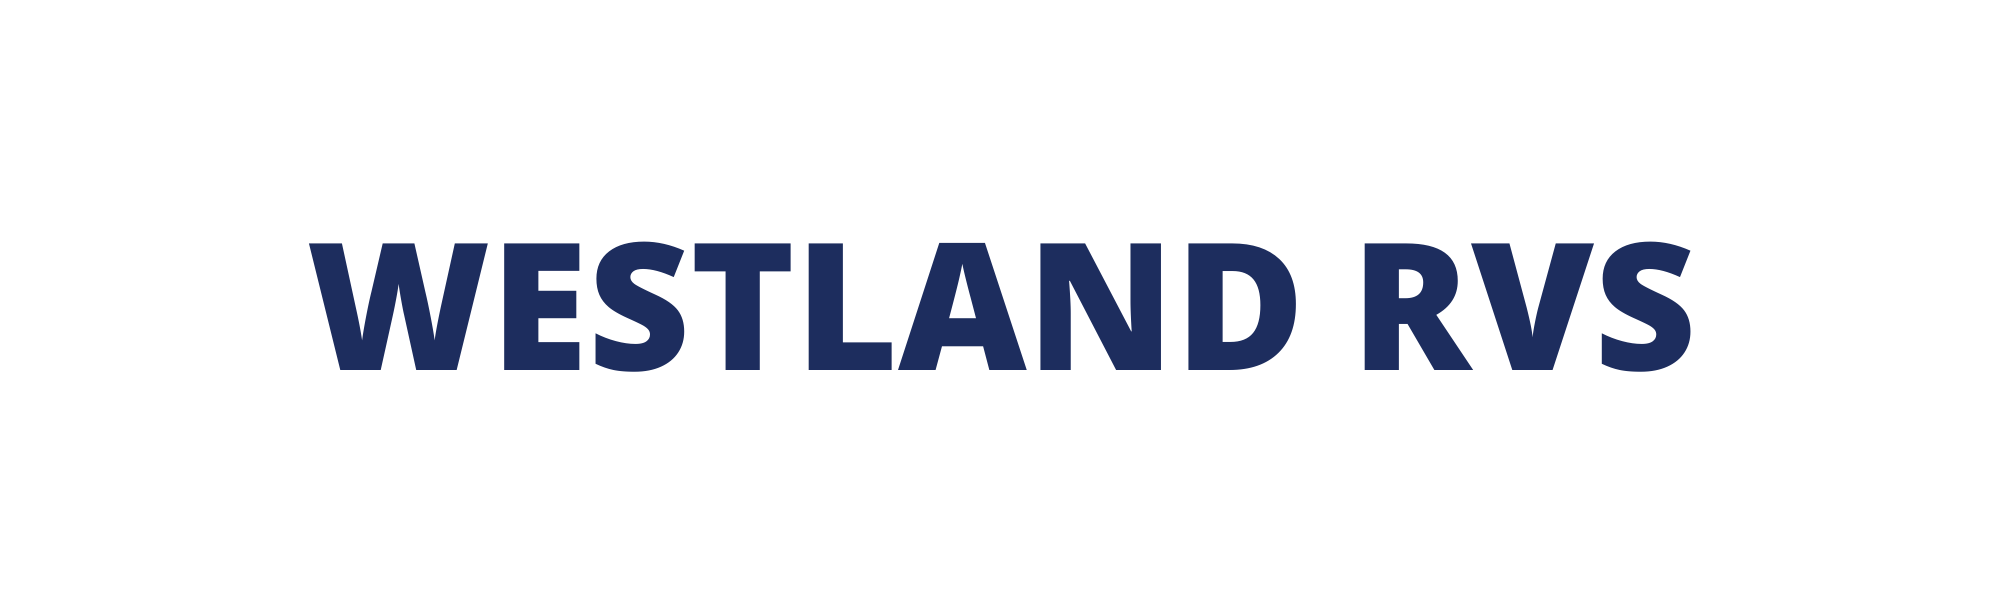 A white background with the words Westland RVs in navy blue text